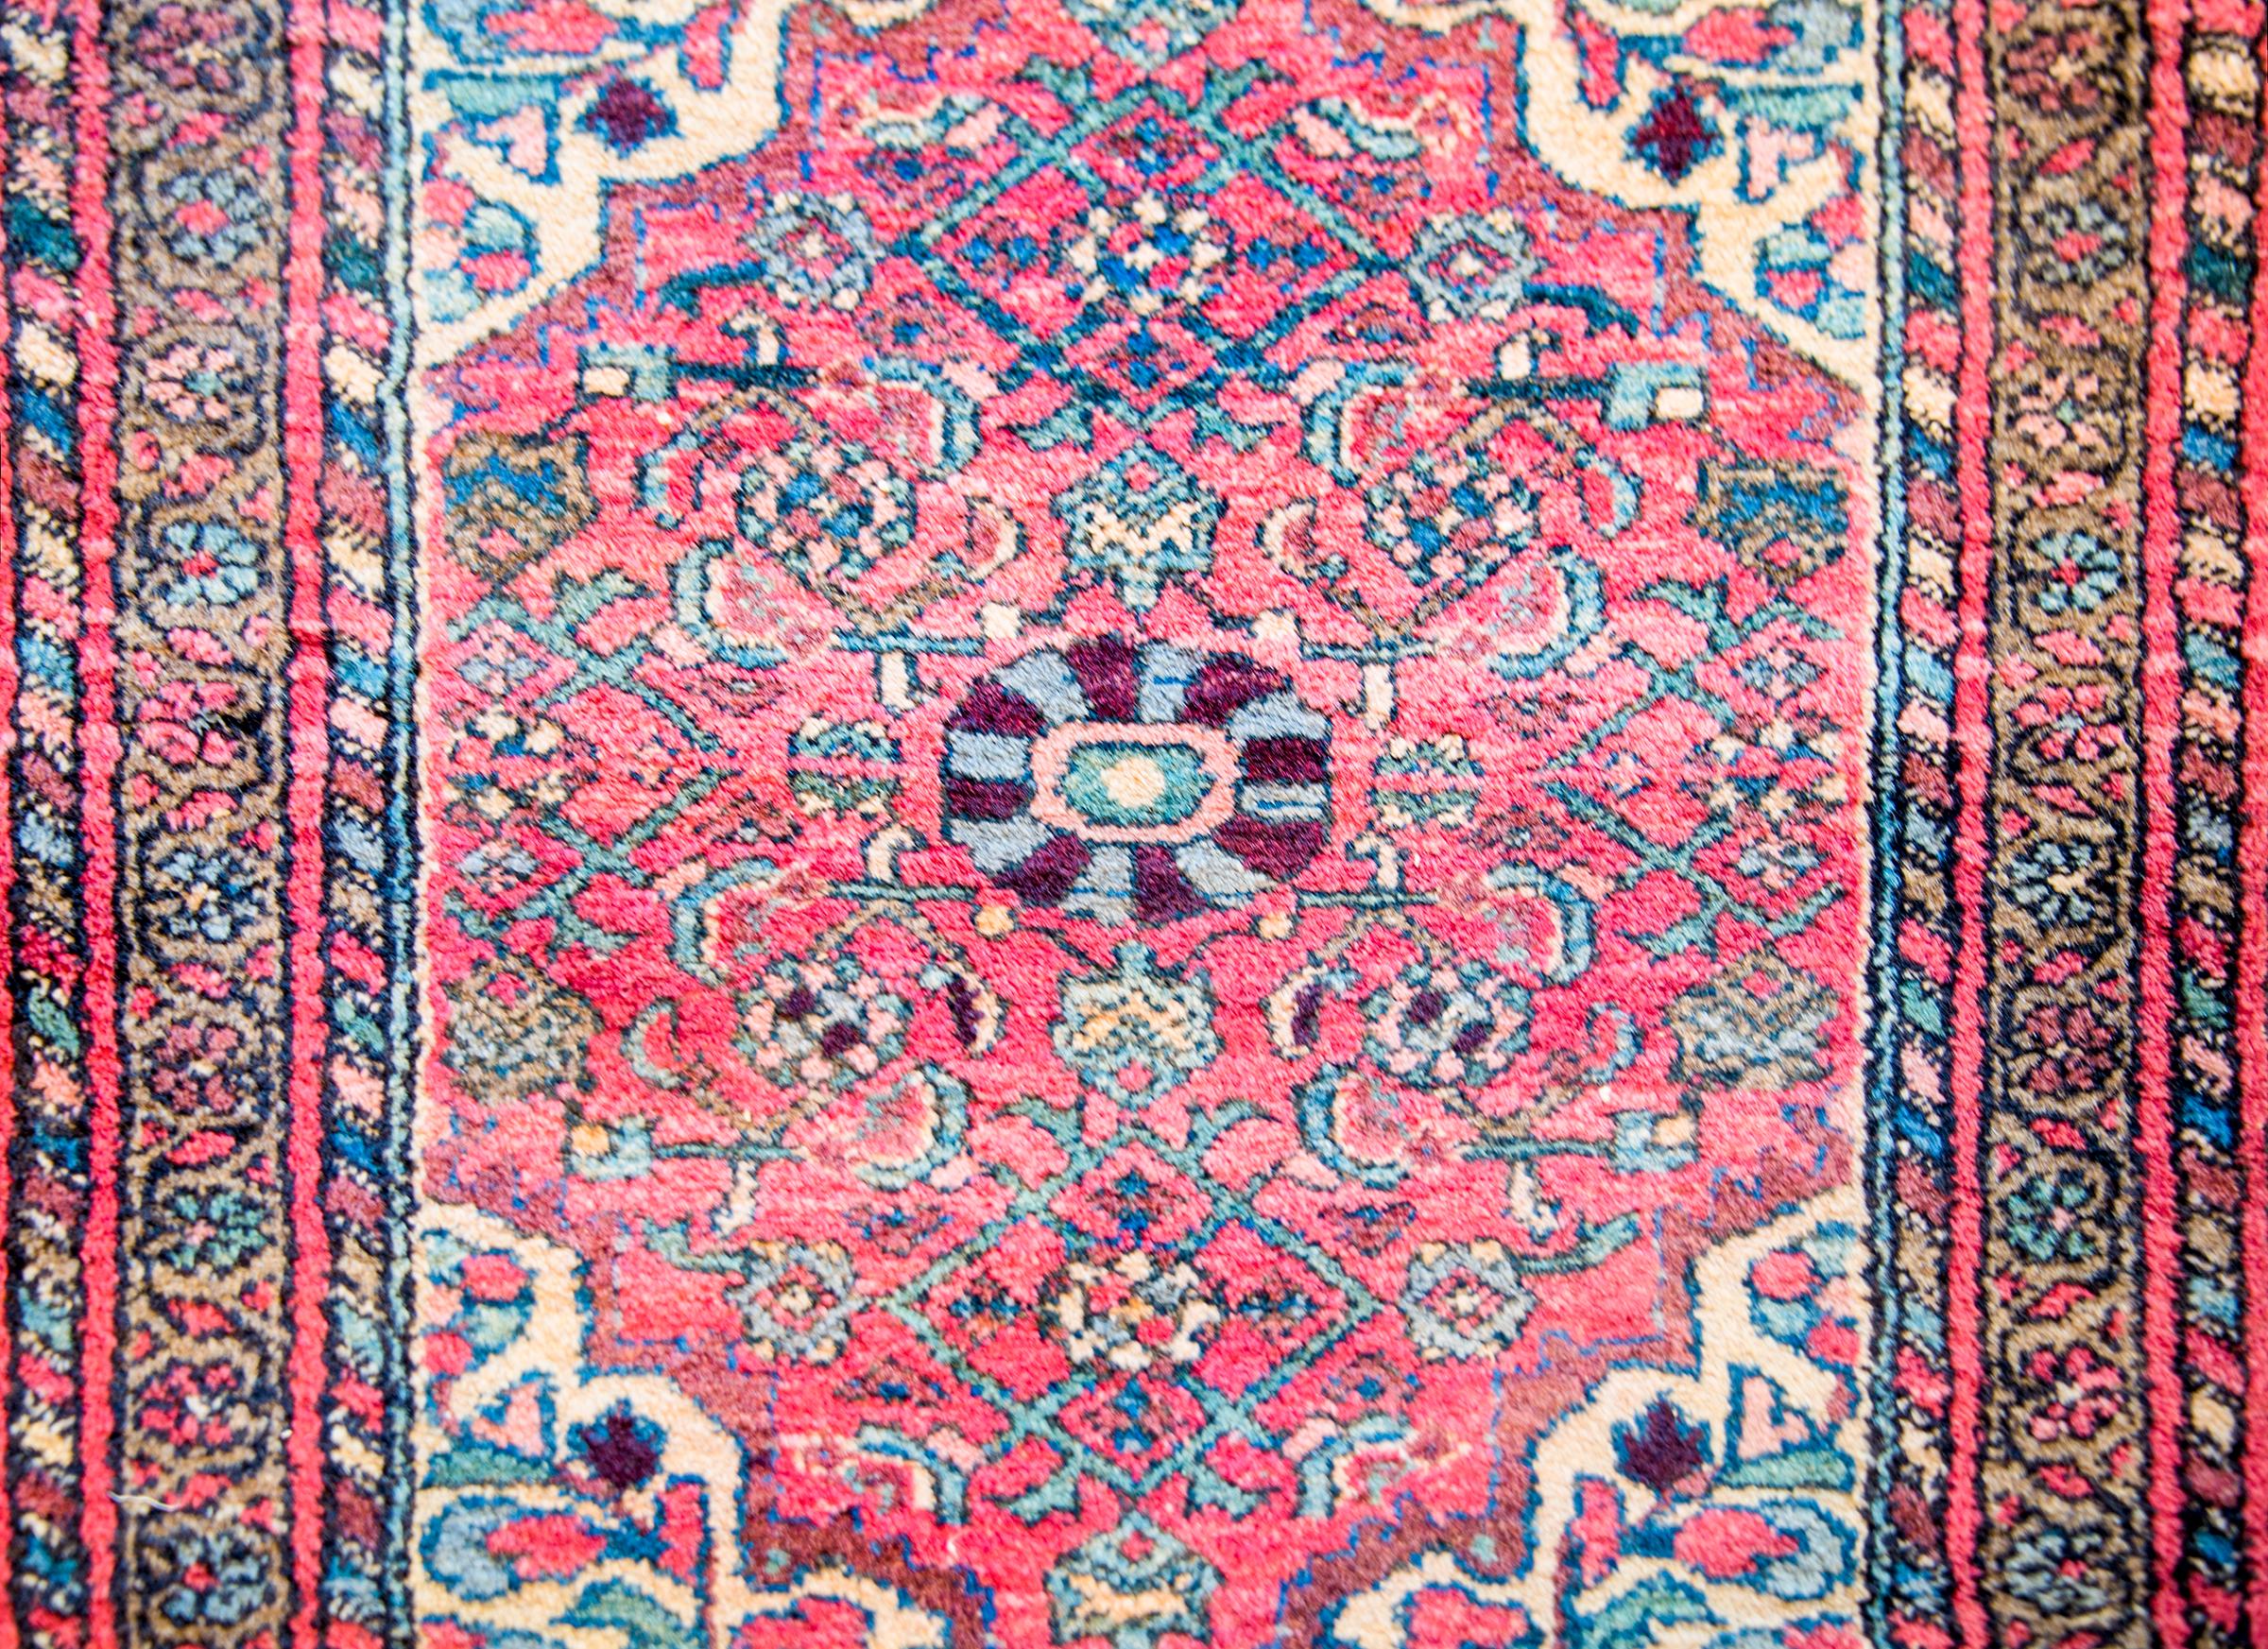 A gorgeous early 20th century Persian Malayer rug with a beautiful central flower medallion amidst an all-over field of flowers on a cranberry background. The border is traditional, with a central petite floral and vine stripe flanked by matching